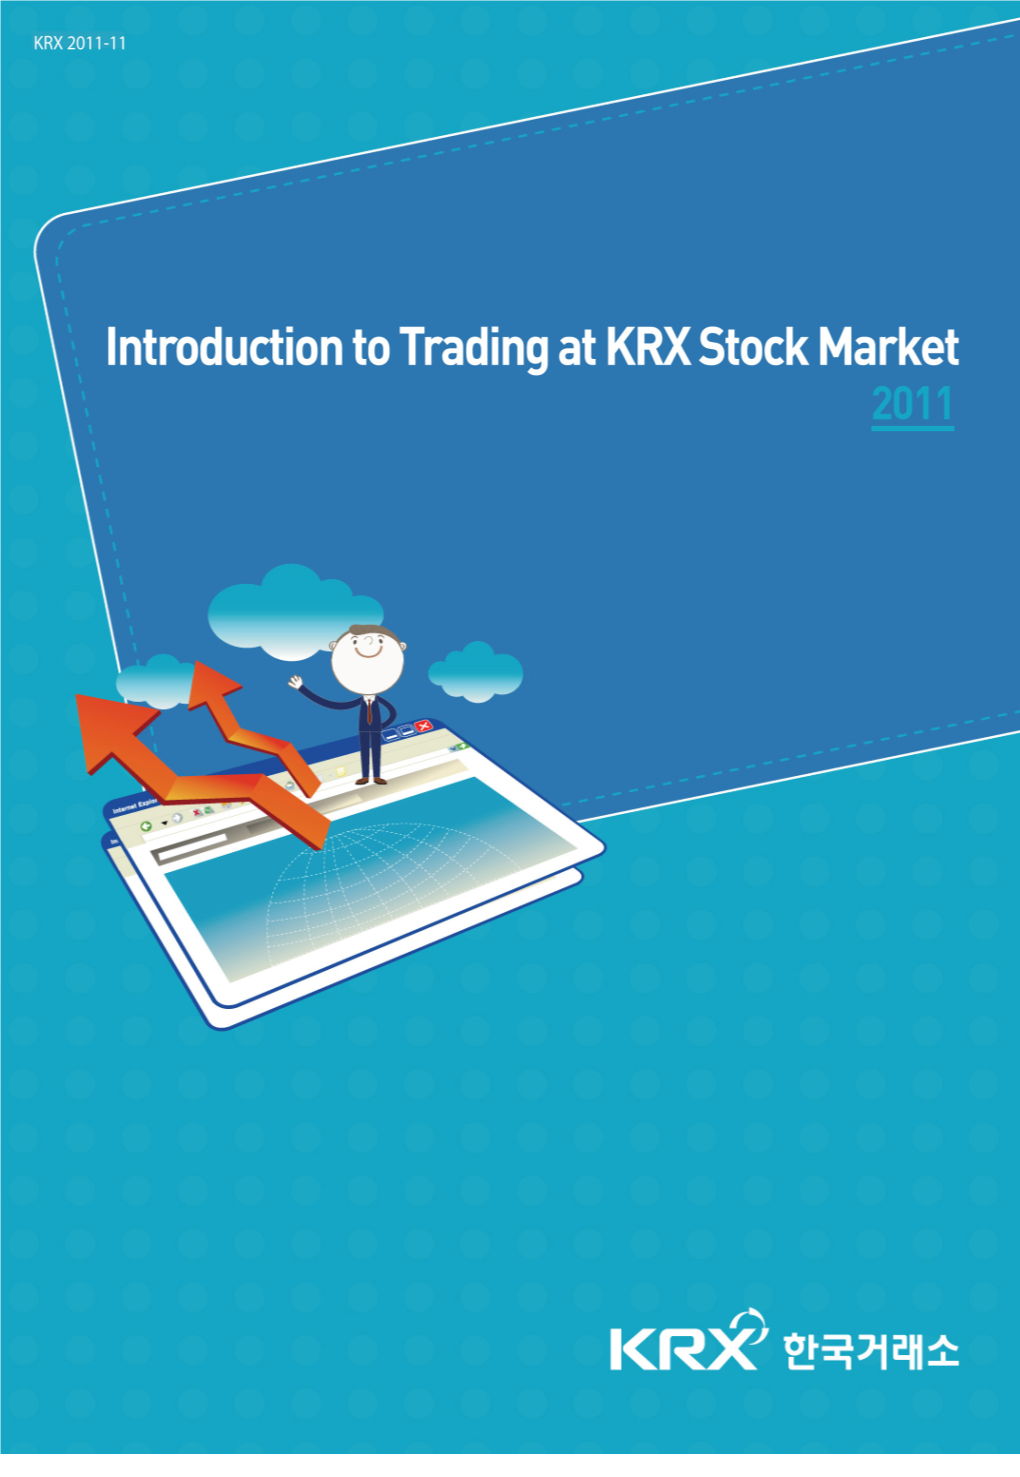 Introduction to Trading at KRX Stock Markets